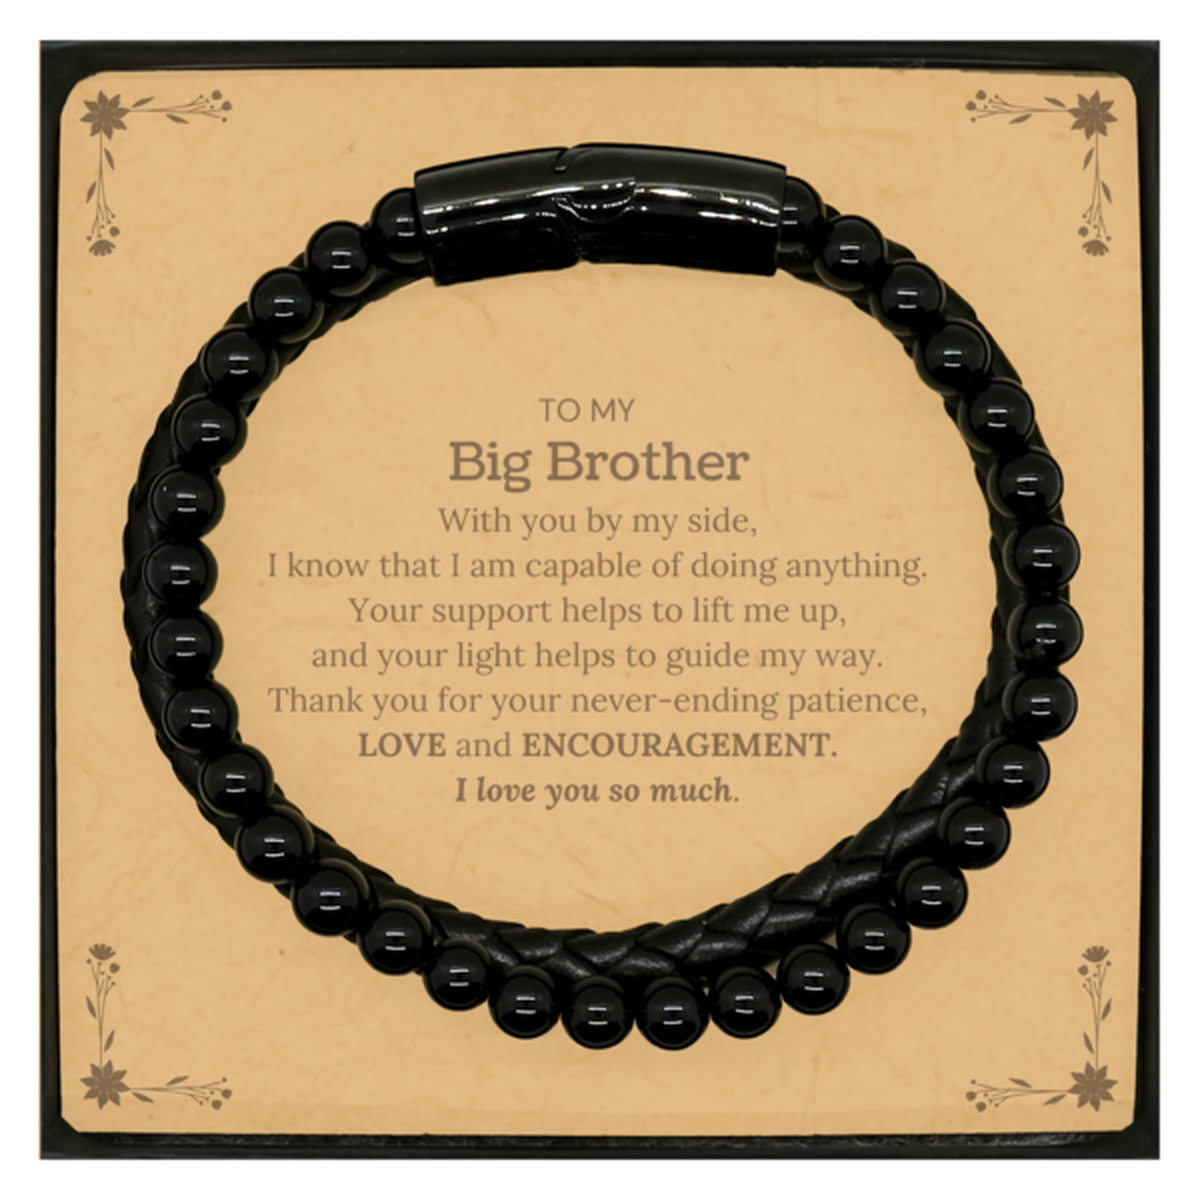 Appreciation Big Brother Stone Leather Bracelets Gifts, To My Big Brother Birthday Christmas Wedding Keepsake Gifts for Big Brother With you by my side, I know that I am capable of doing anything. I love you so much